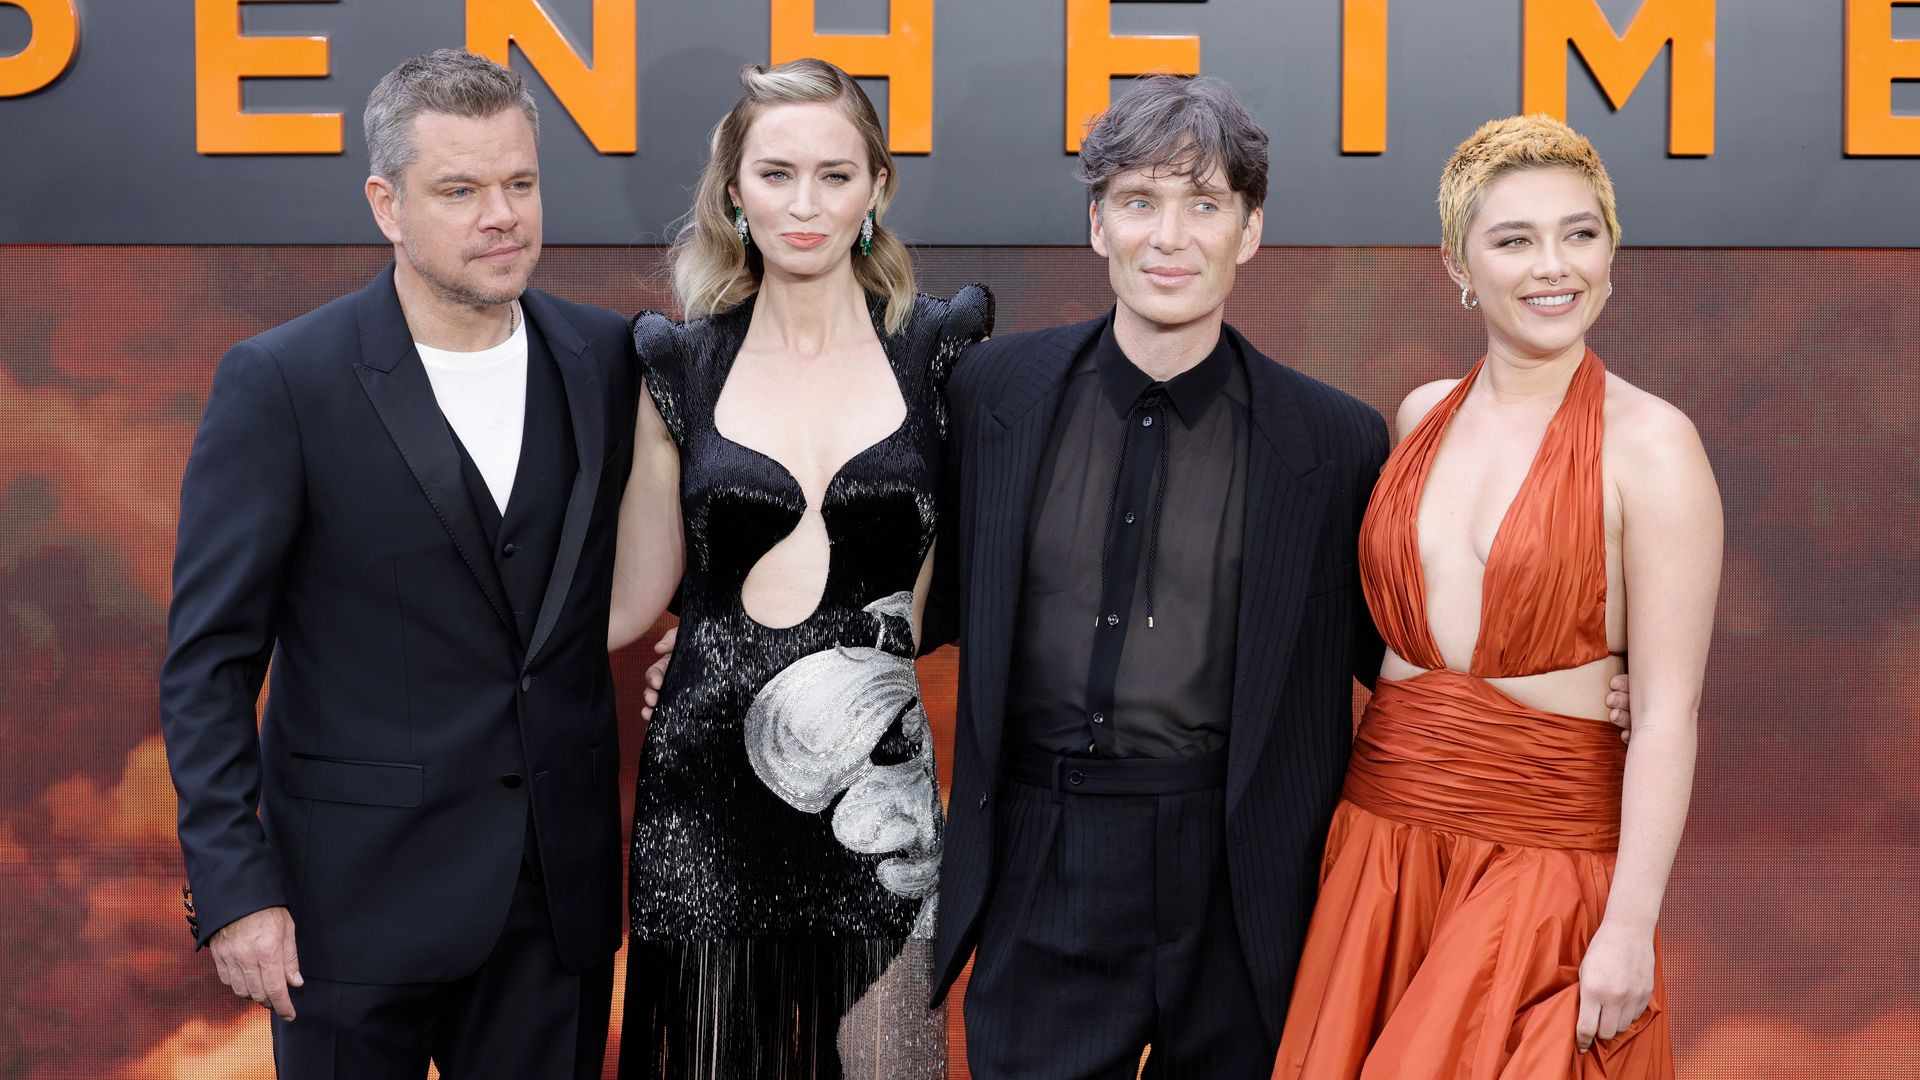 Matt Damon, Emily Blunt, Cillian Murphy and Florence Pugh attend the "Oppenheimer" UK Premiere at the Odeon Luxe Leicester Square on July 13, 2023 in London, England